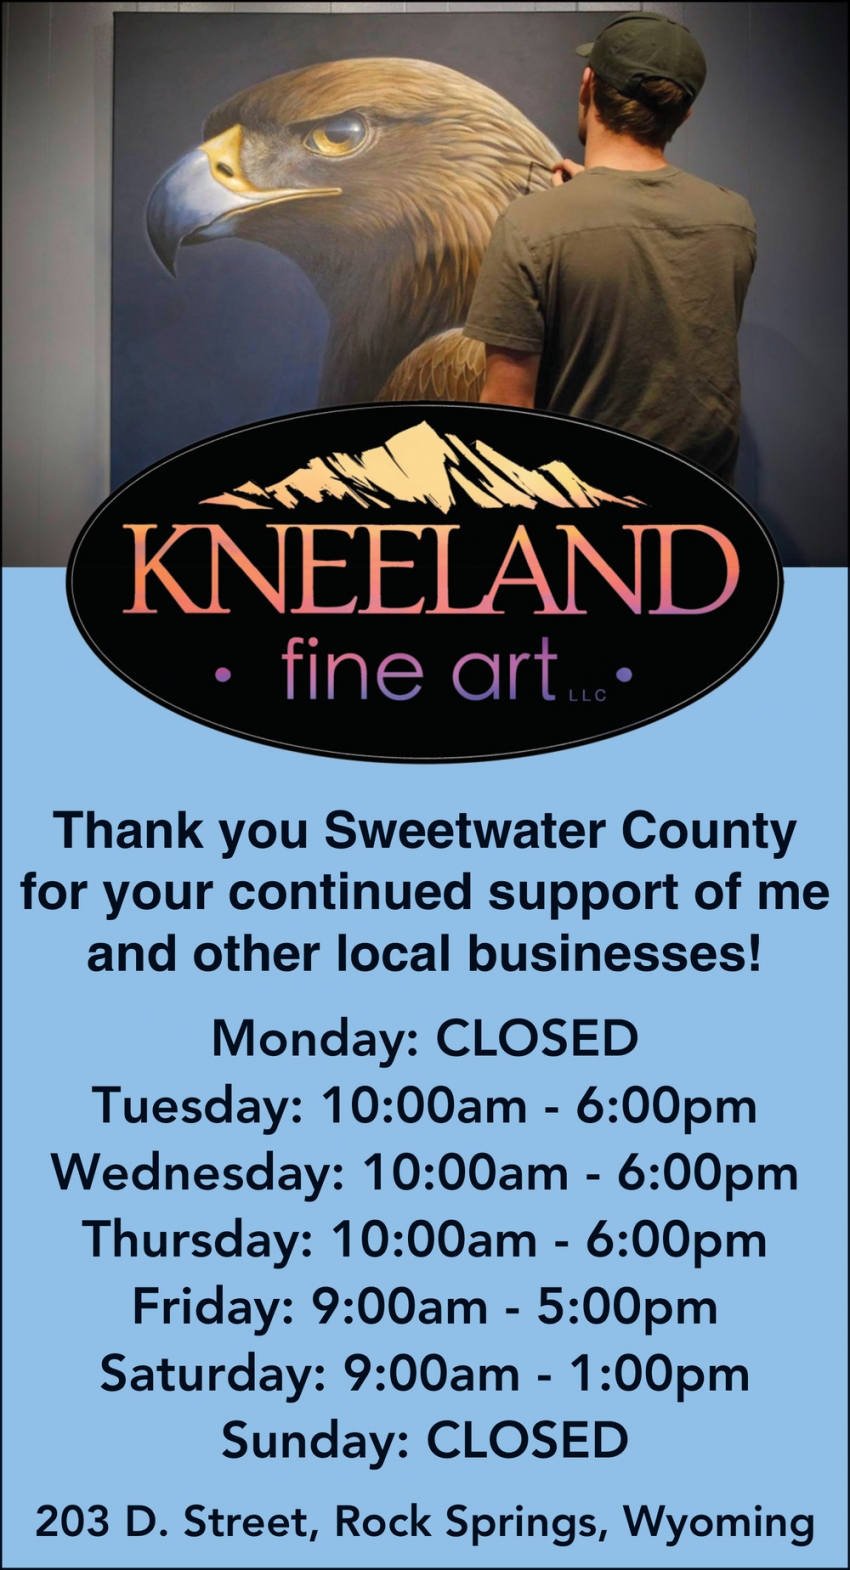 Thank You Sweetwater County